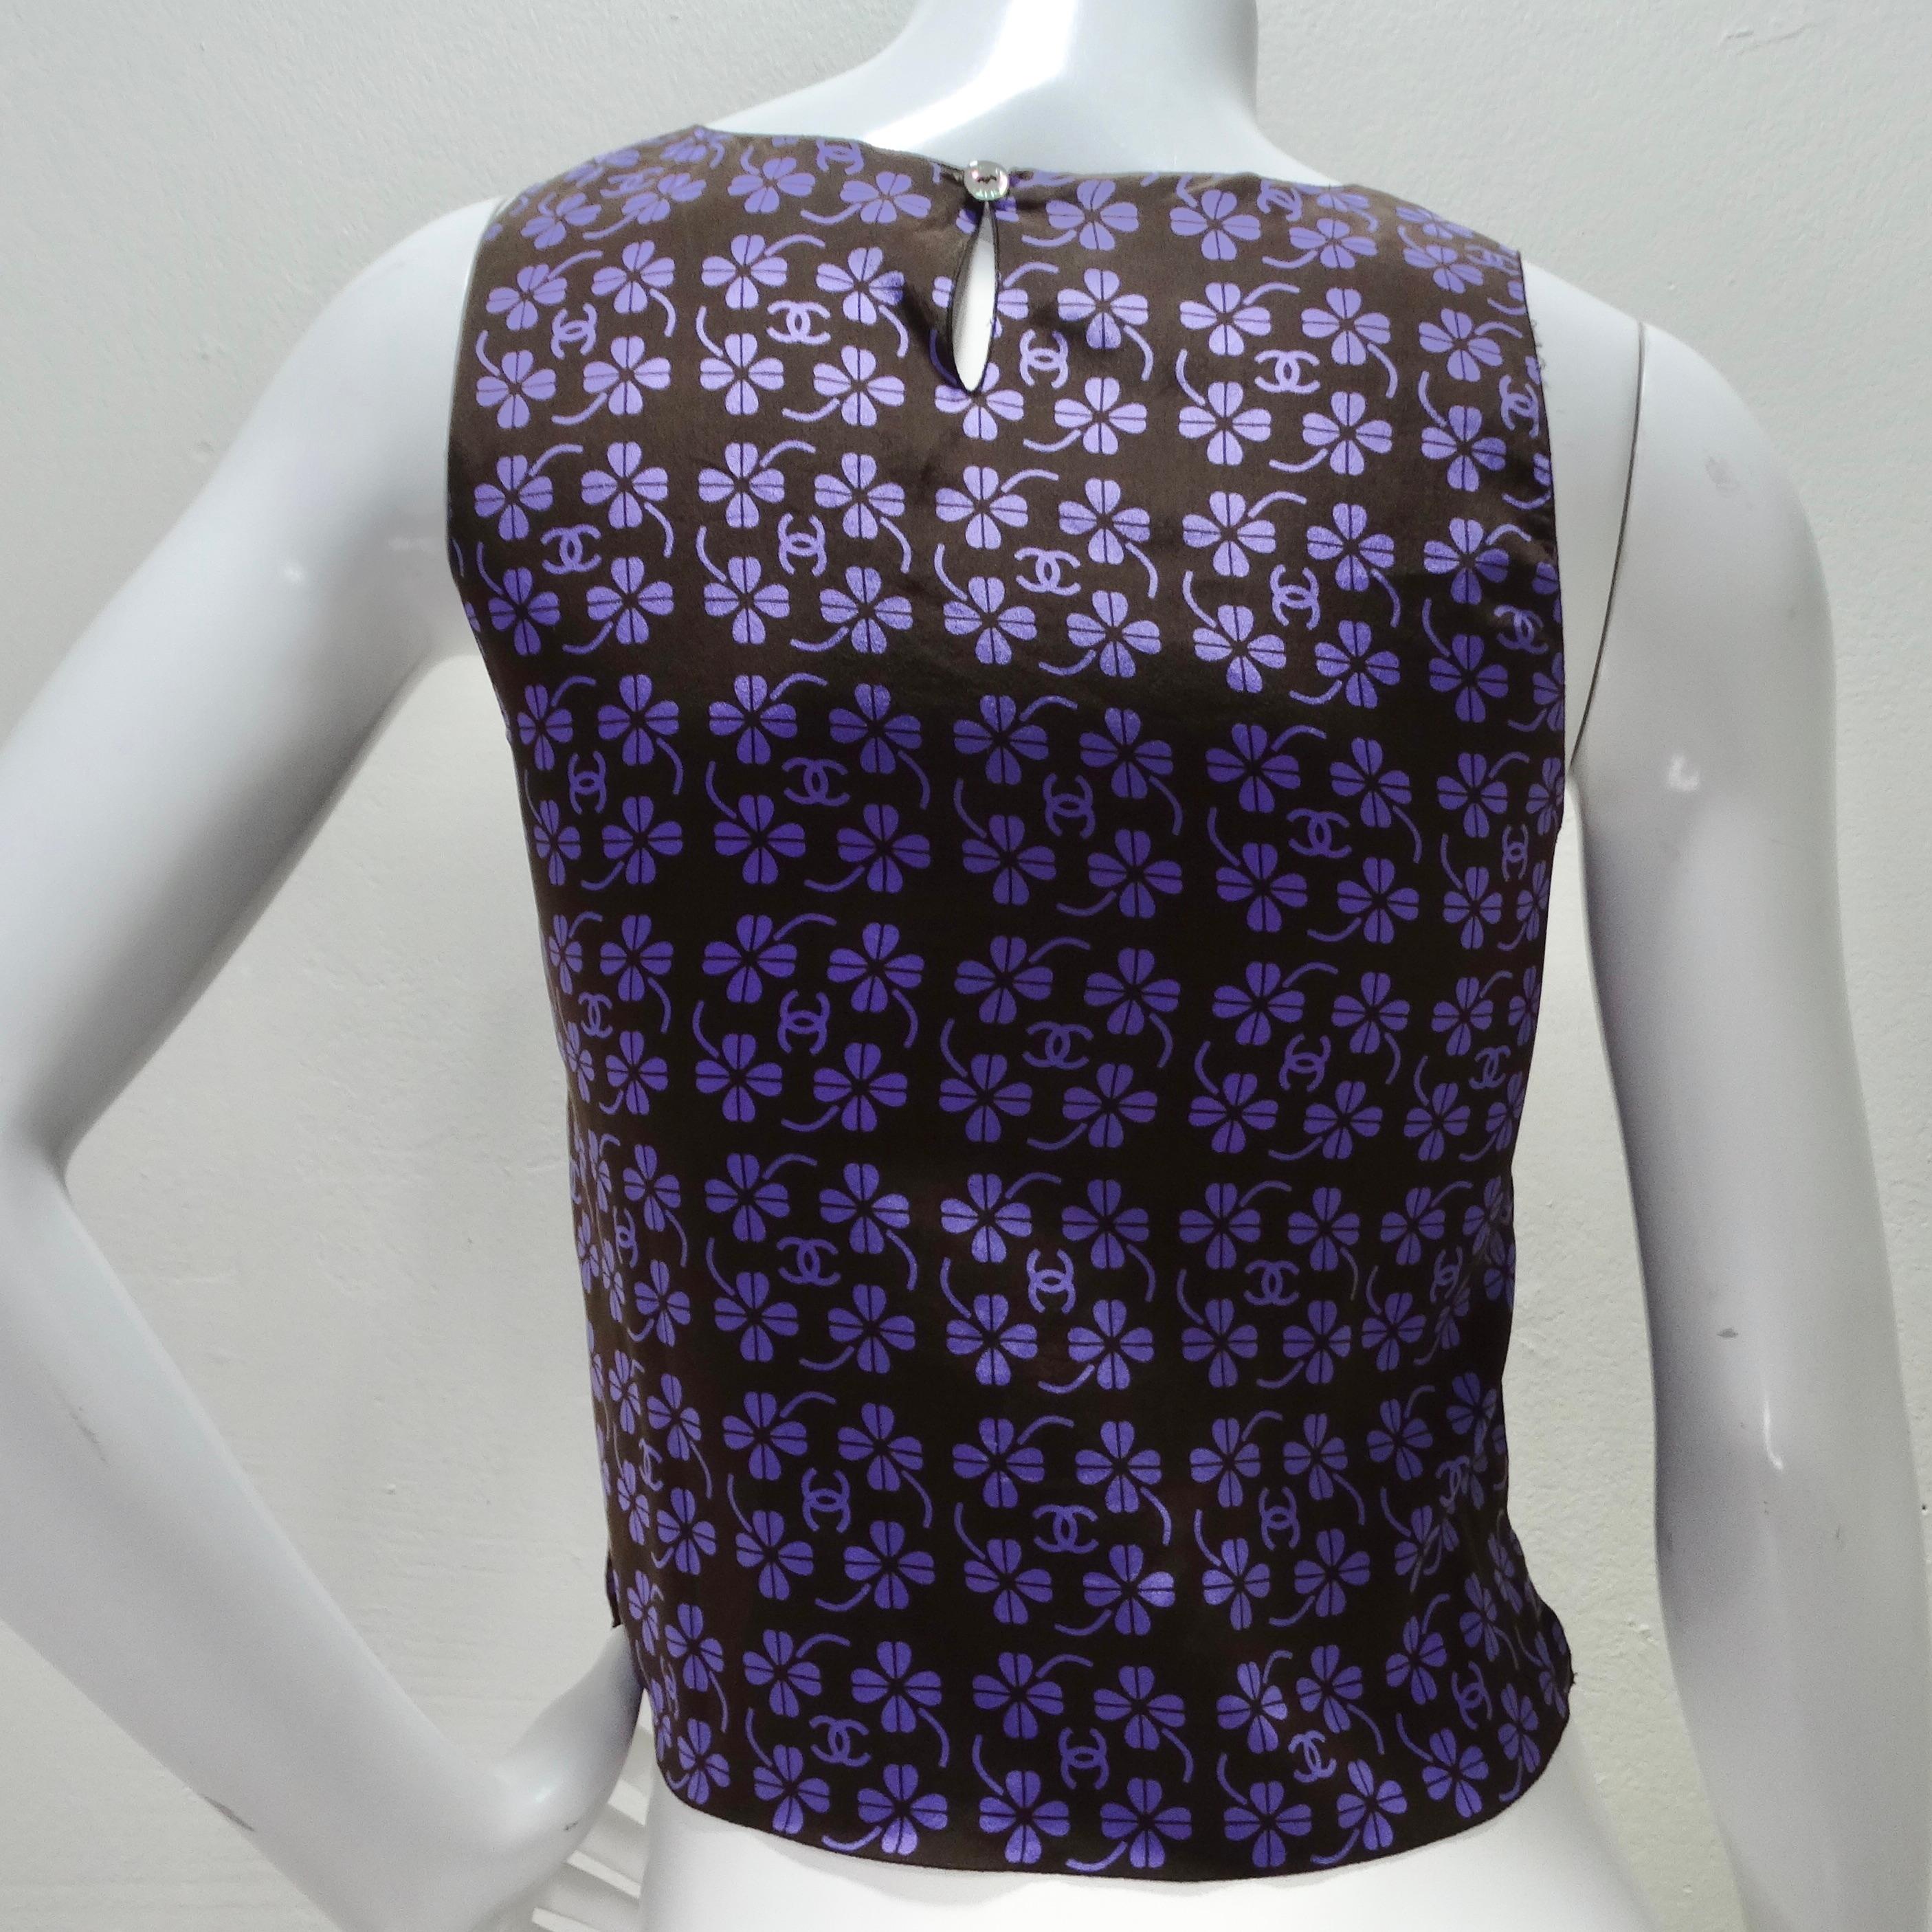 Chanel Clover CC Logo Print Sleeveless Shirt In Excellent Condition For Sale In Scottsdale, AZ